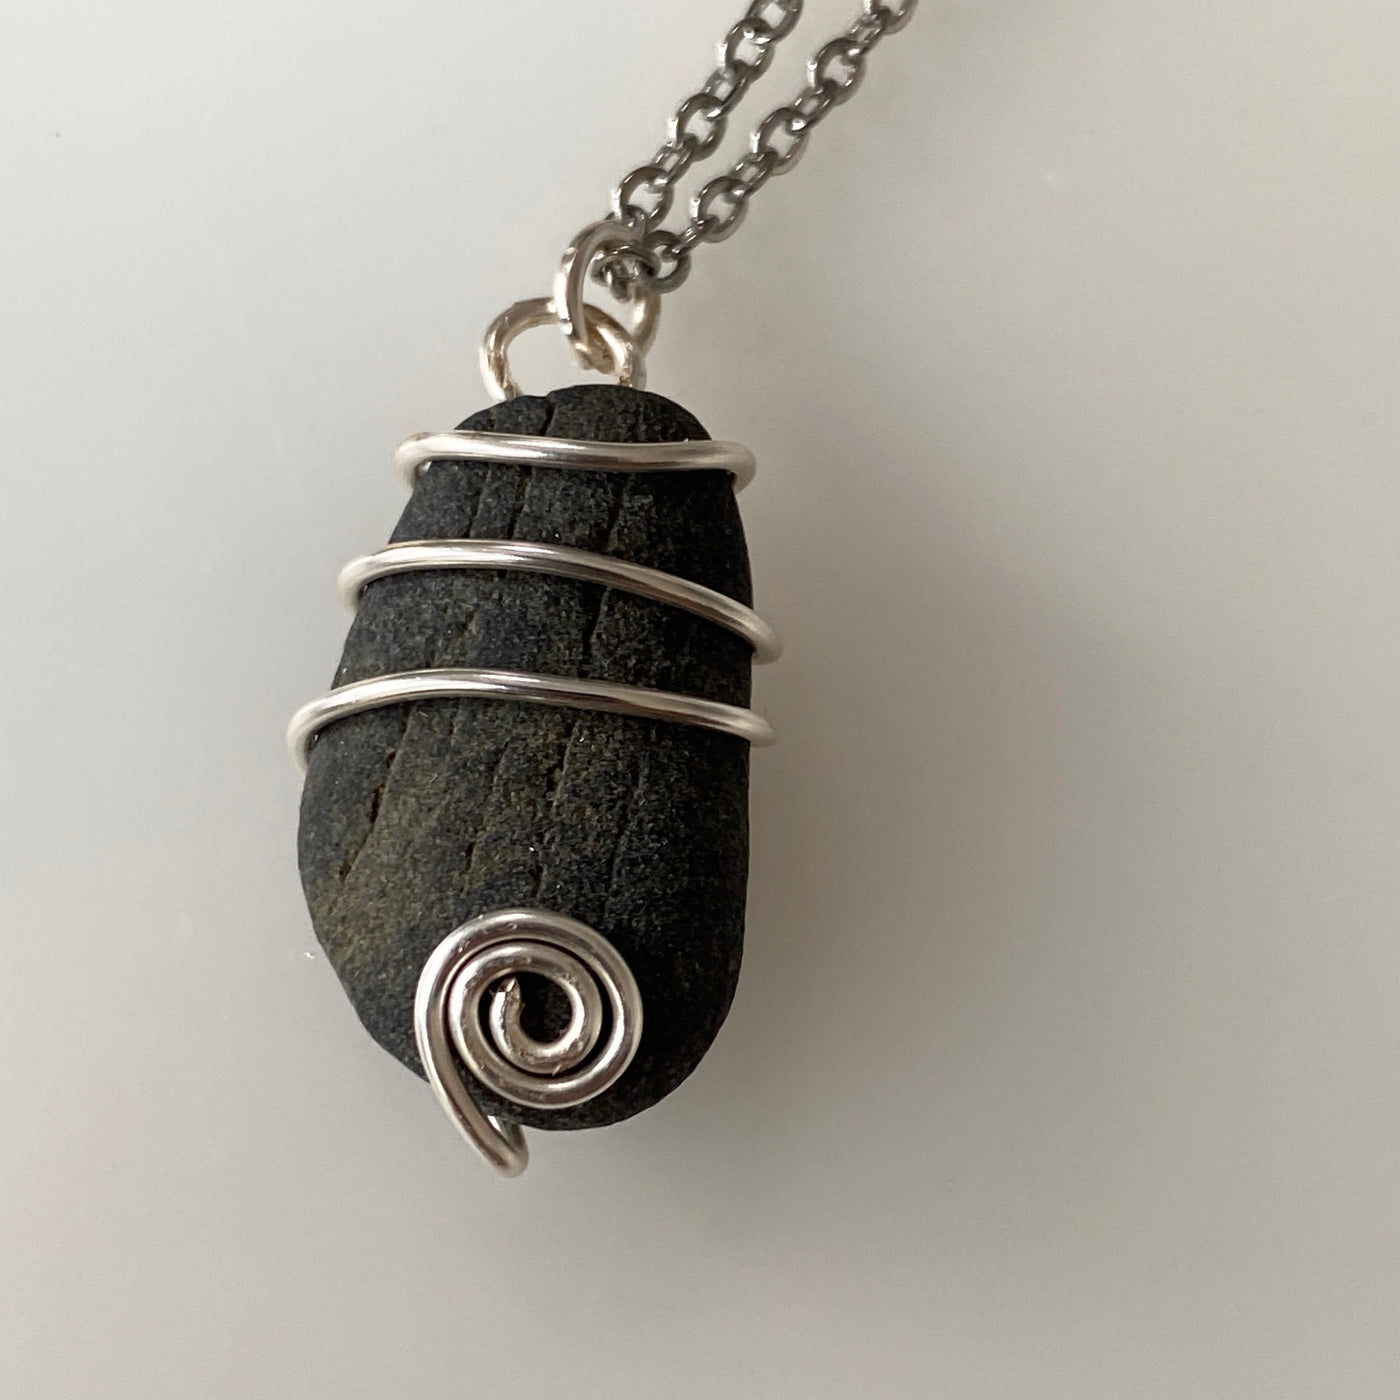 Small pendant, black natural stone and silver wire for Elbastones collection.